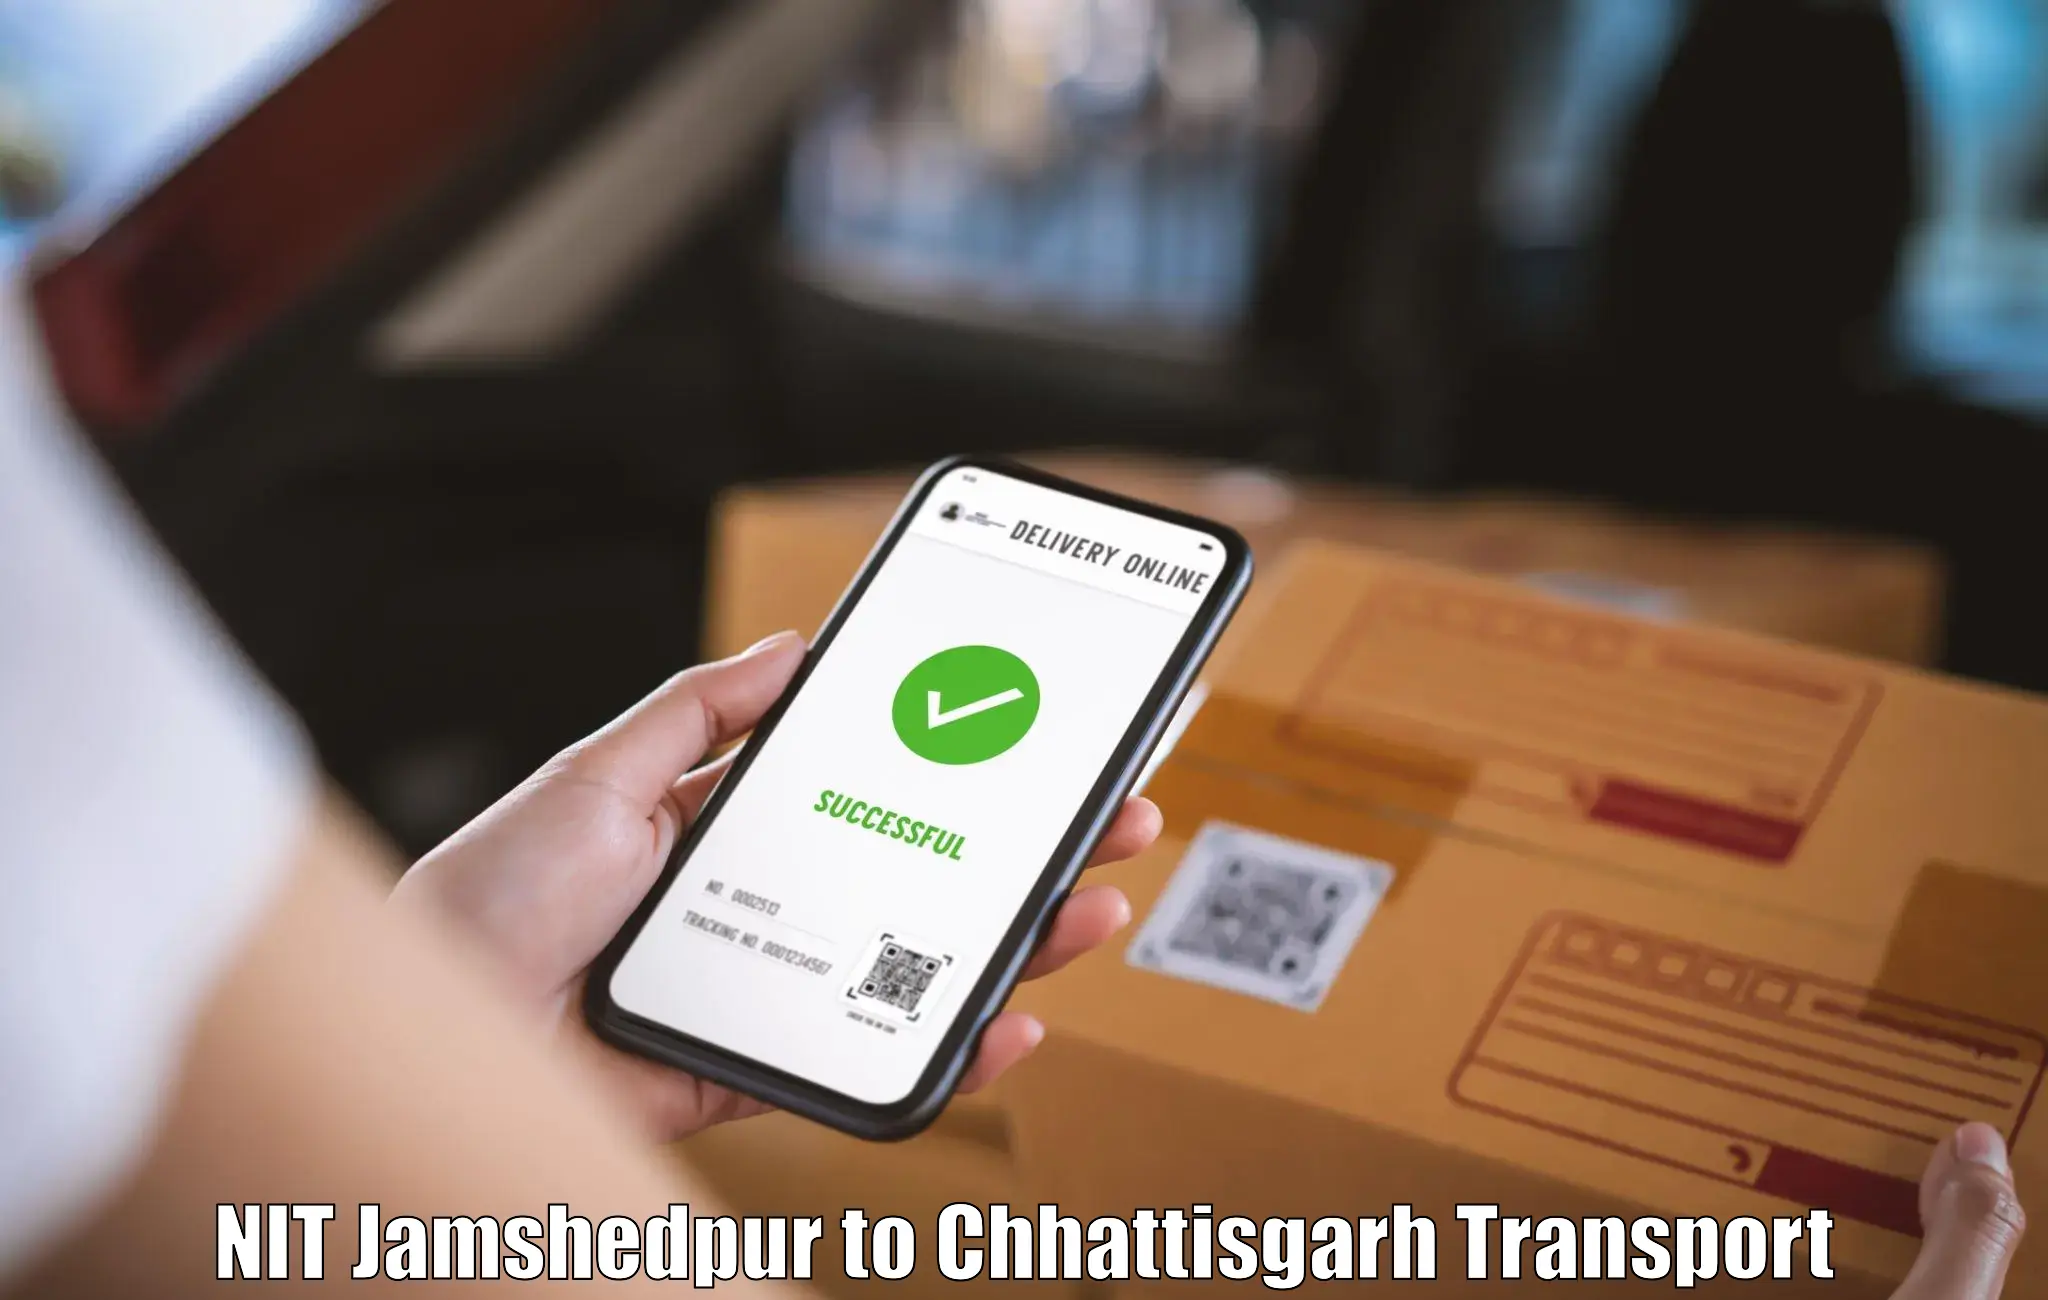 Shipping services NIT Jamshedpur to Dhamtari